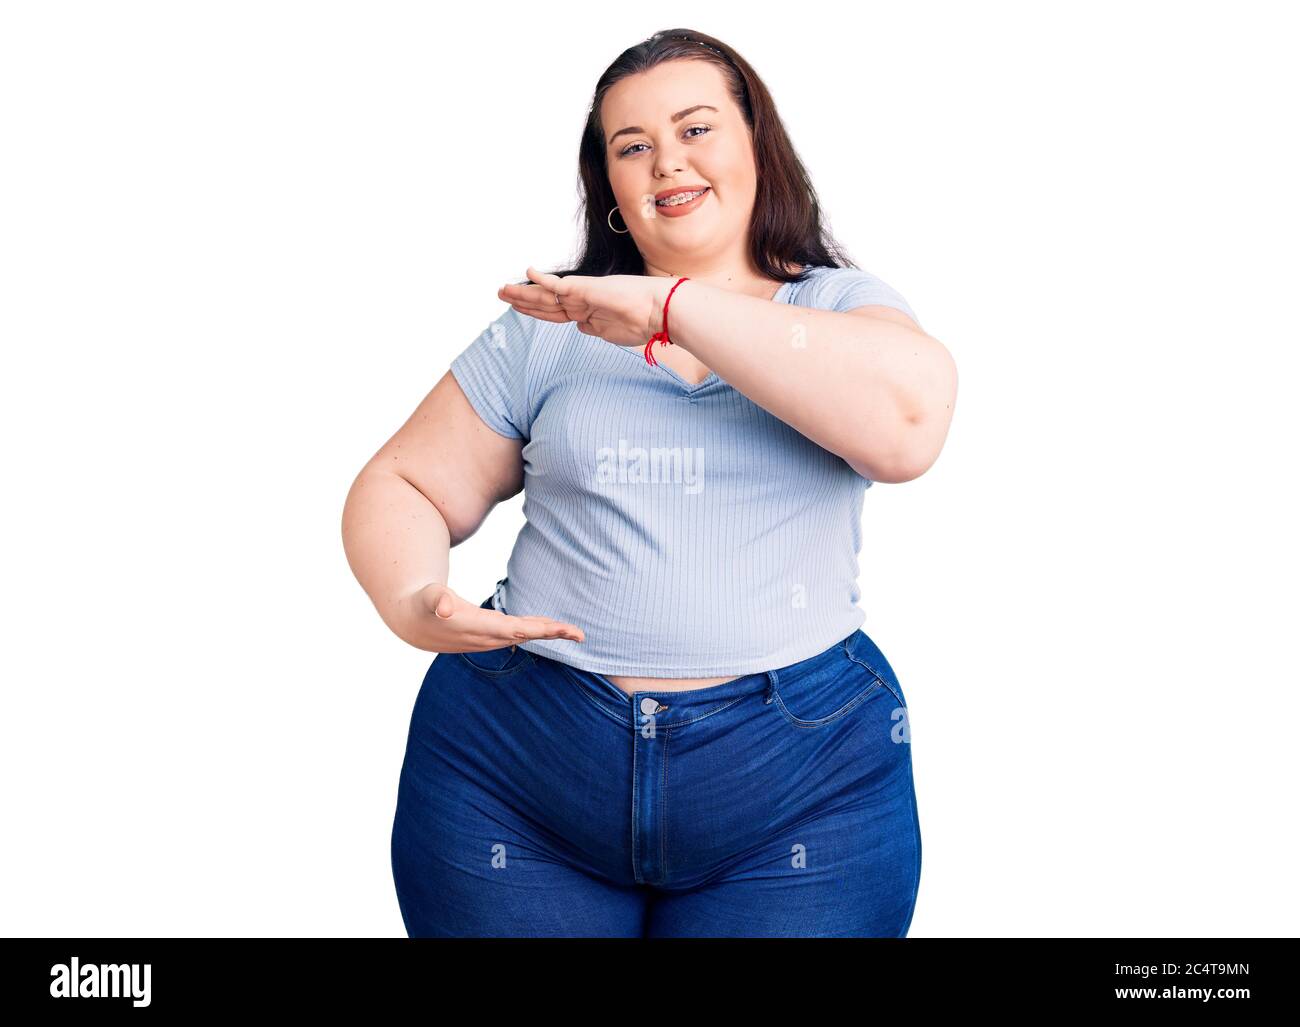 https://c8.alamy.com/comp/2C4T9MN/young-plus-size-woman-wearing-casual-clothes-gesturing-with-hands-showing-big-and-large-size-sign-measure-symbol-smiling-looking-at-the-camera-meas-2C4T9MN.jpg